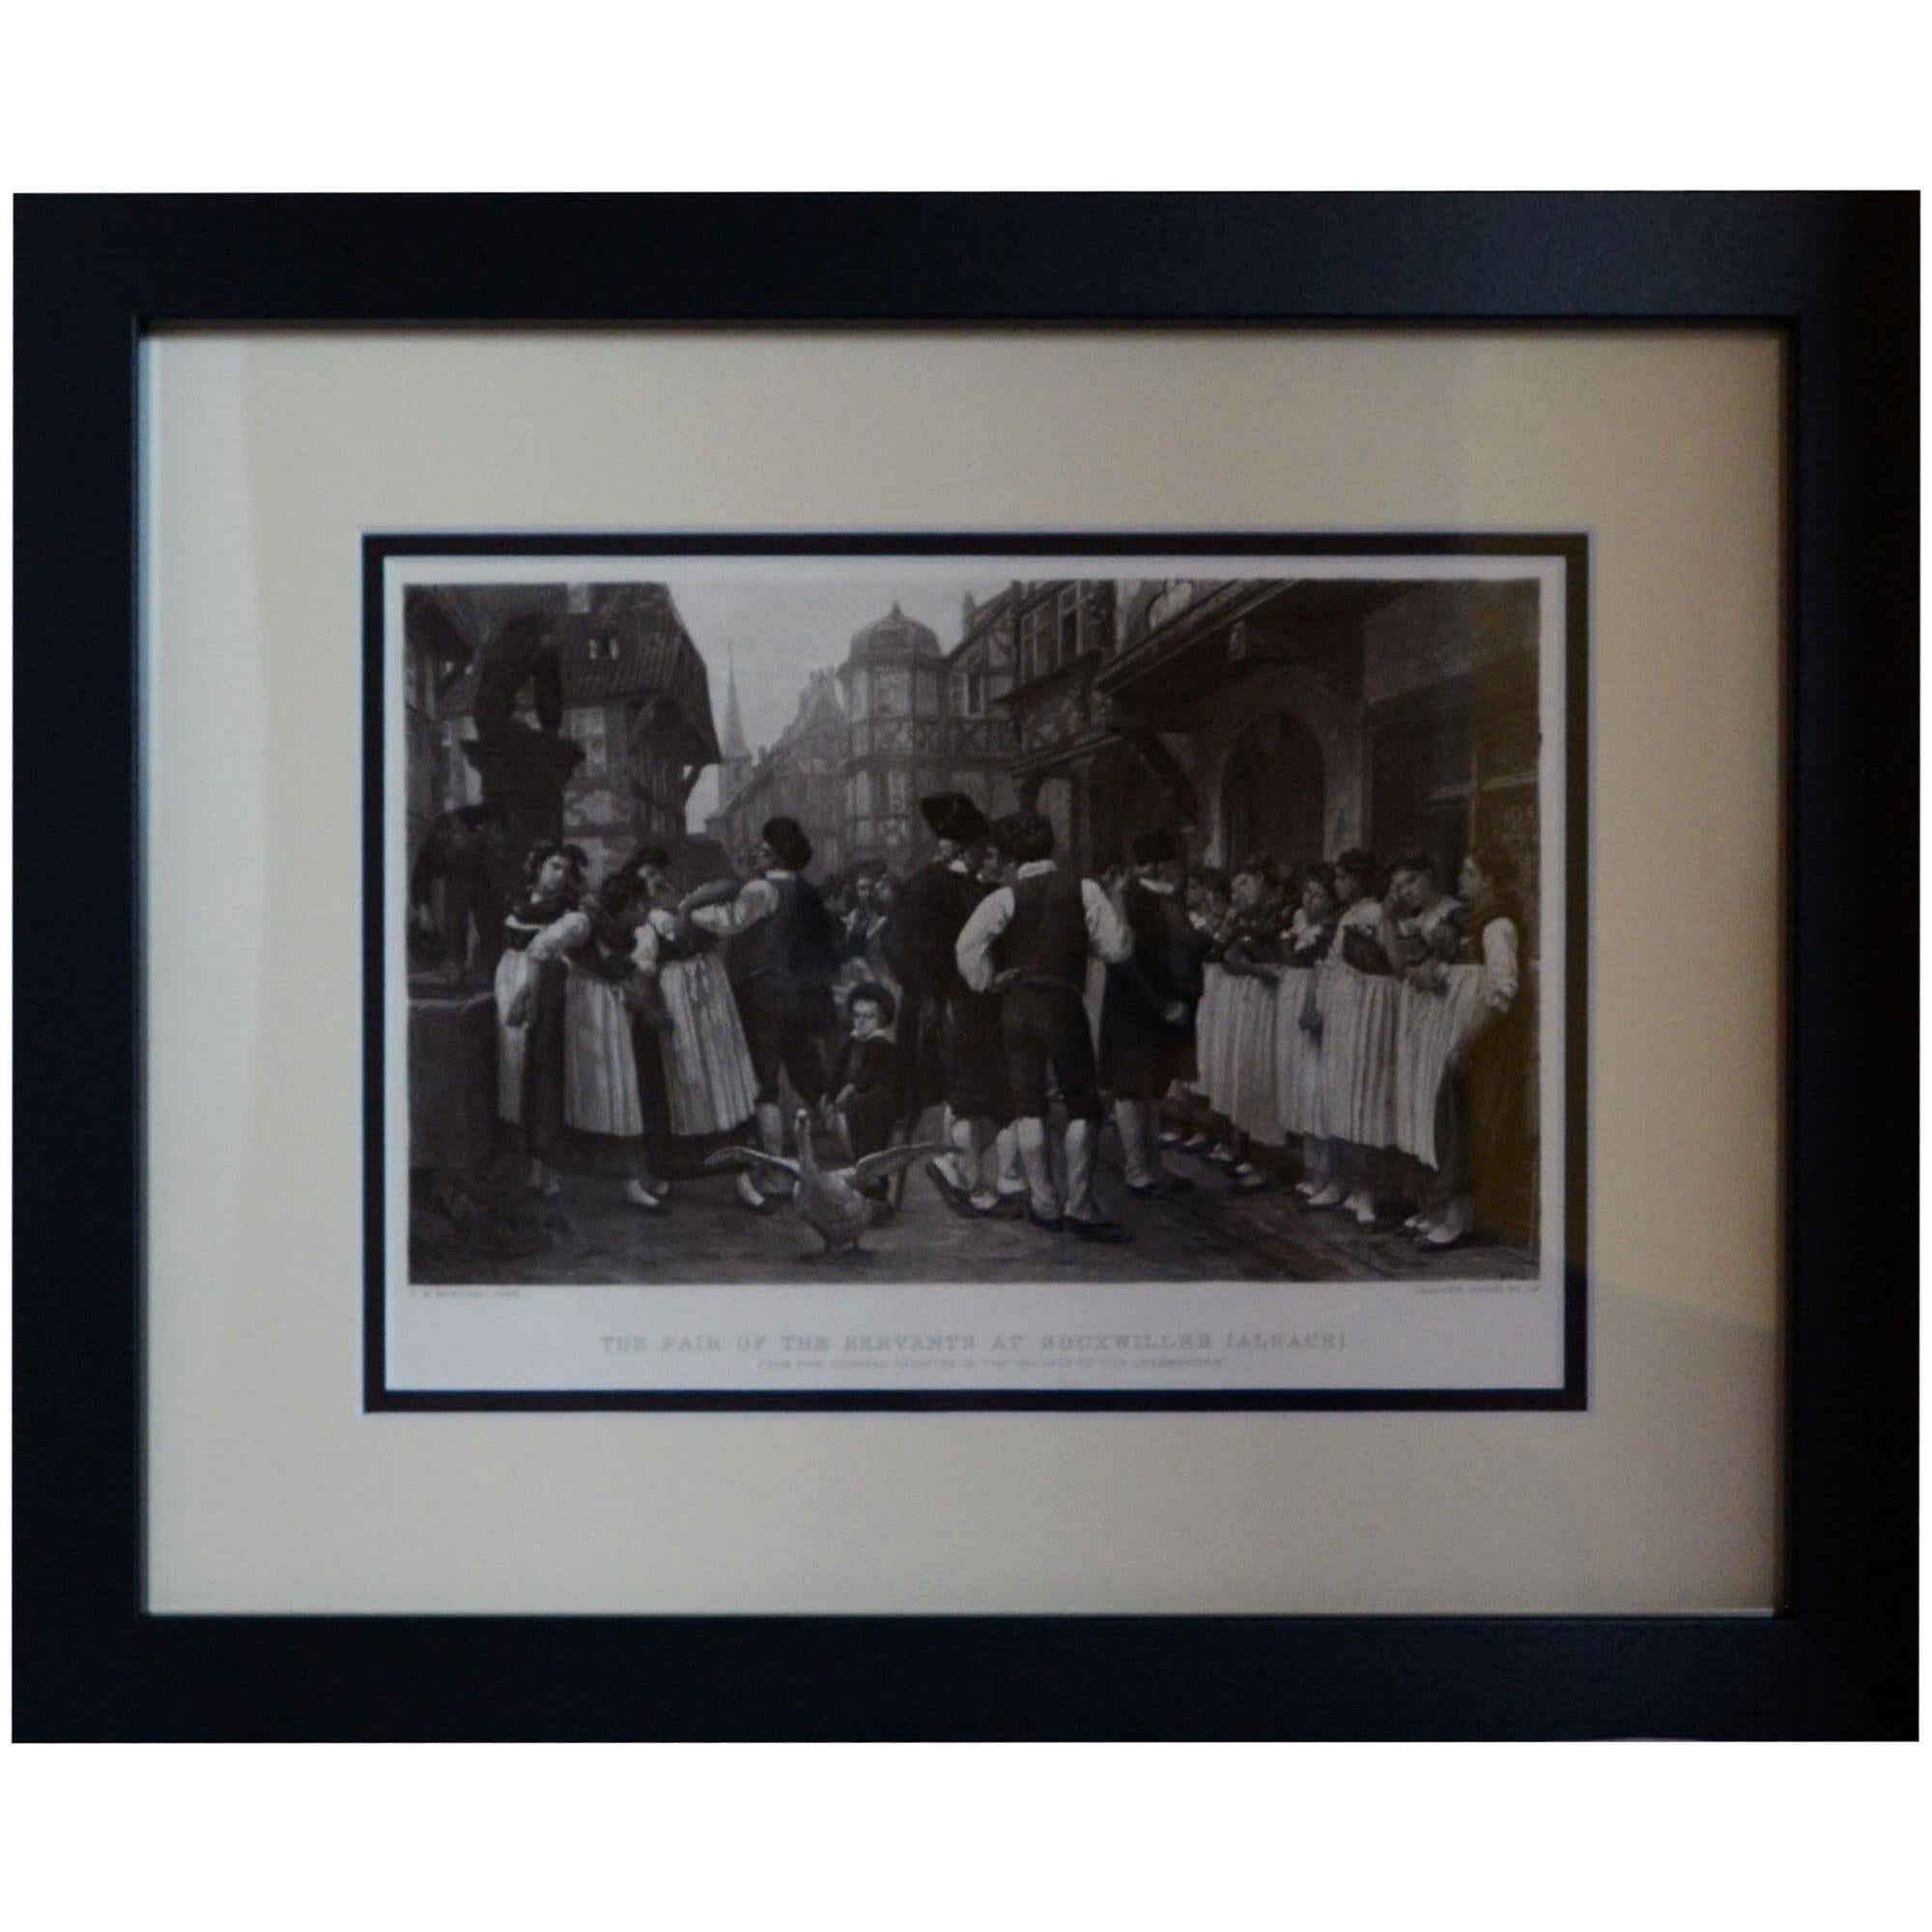 Antique Print, "The Fair of the Servants at Bouxwiller" For Sale